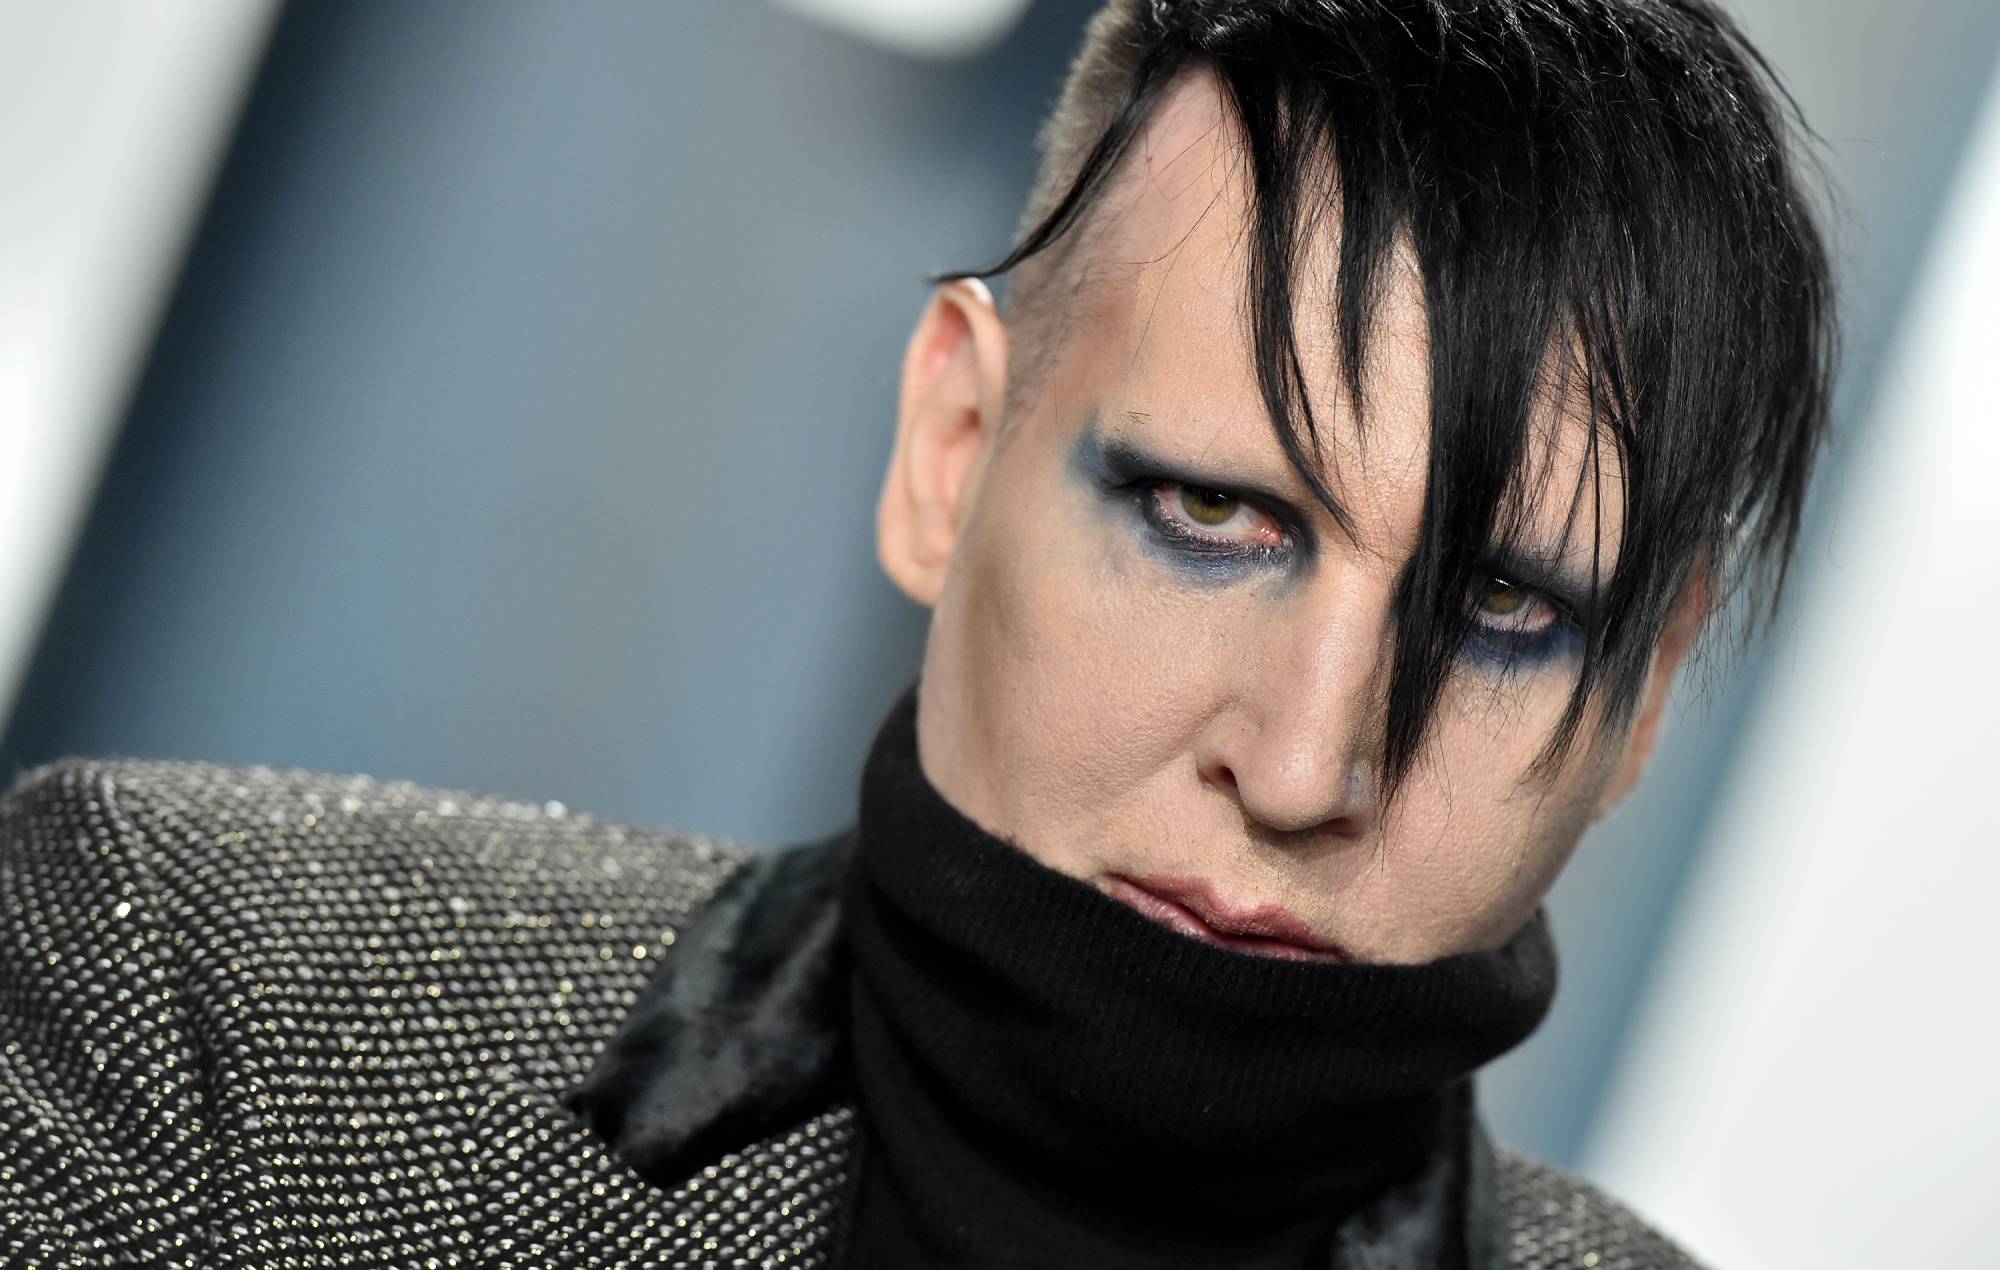 Marilyn Manson ordered to pay even more legal fees totalling $500,000